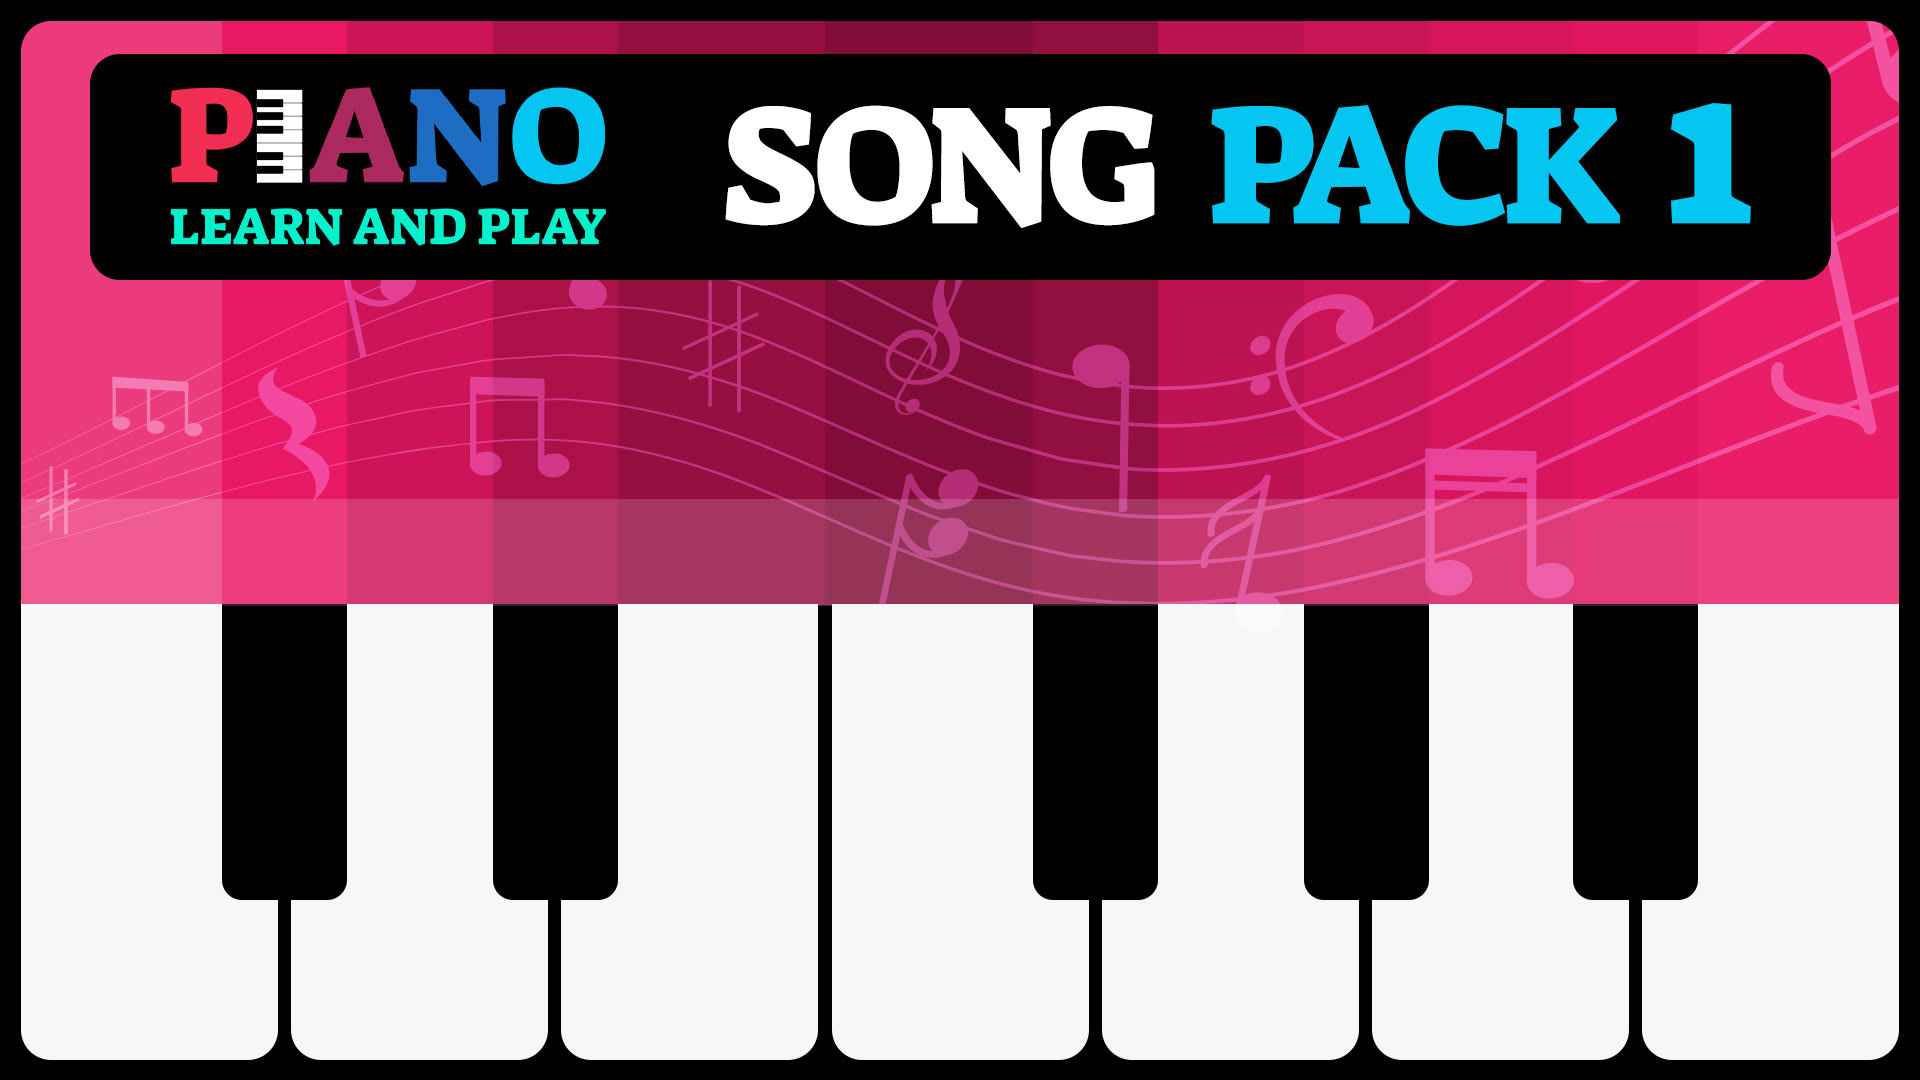 Song Pack 1